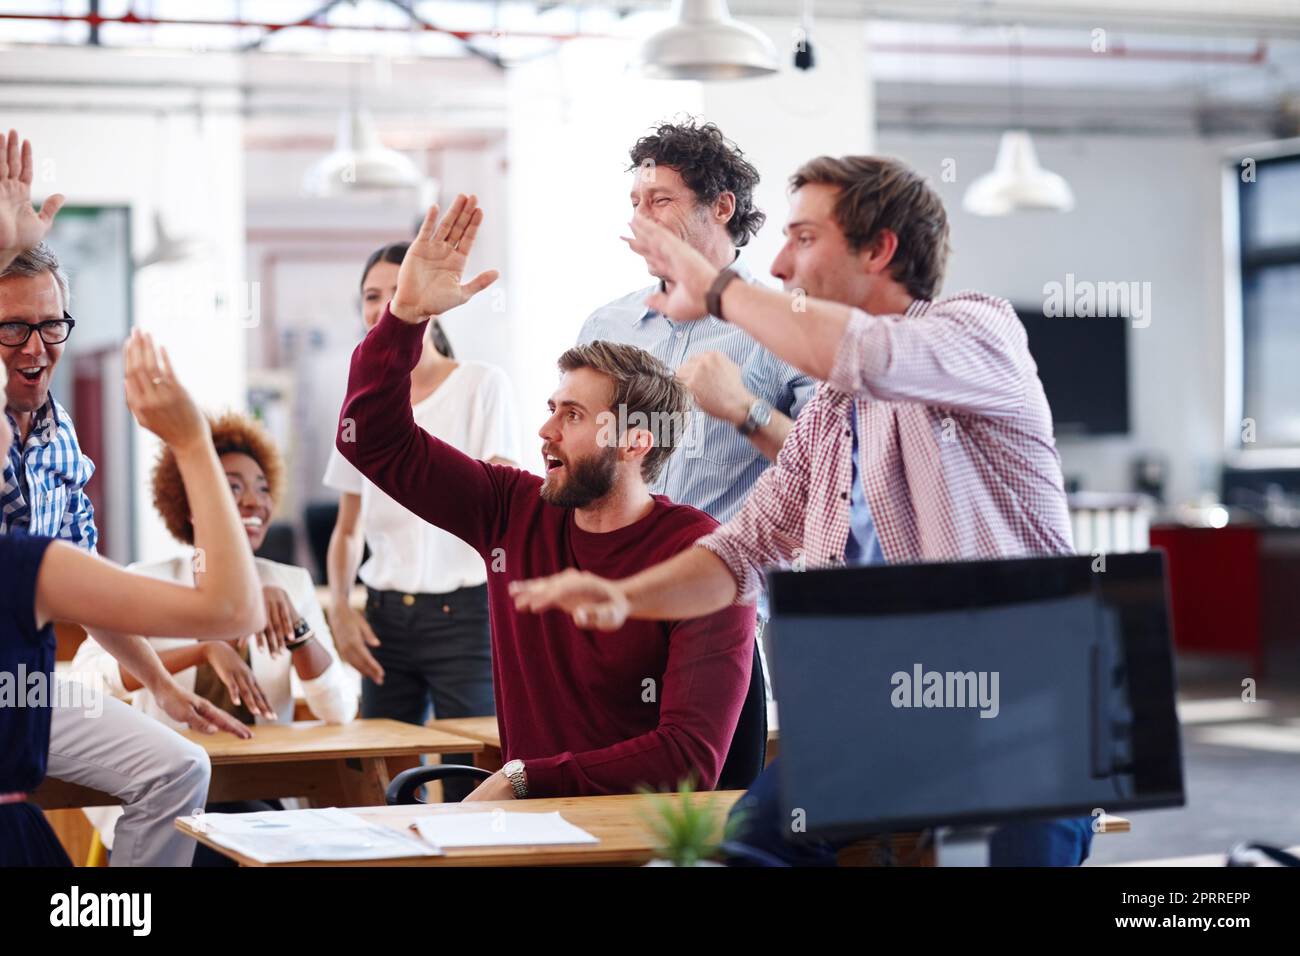 High-fives and happy dances are appropriate in this office. A group of excited designers celebrating a success during an informal office meeting. Stock Photo